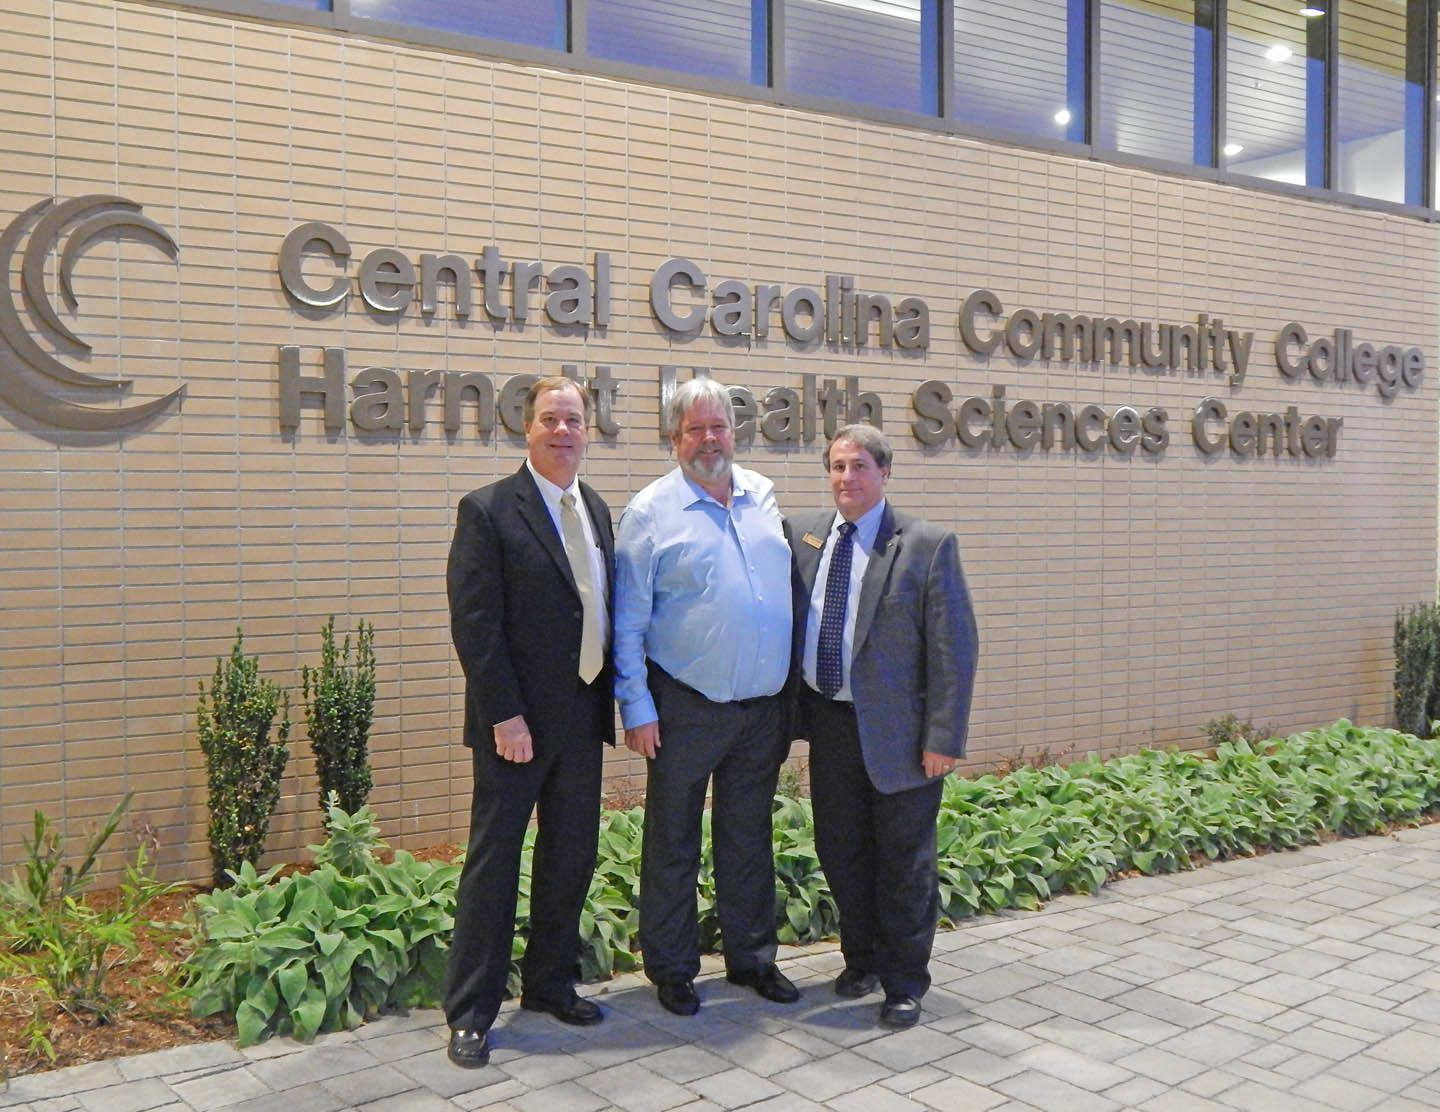 Click to enlarge,  Central Carolina Community College President Bud Marchant (left), former college trustee and former county commissioner Tim McNeill, and CCCC Board of Trustees Chairman Julian Philpott stand outside the college's Harnett Health Sciences Center, in Lillington, following an Oct. 23 presentation by CCCC to McNeill for his service to the college and county. He was honored for being a tireless promoter and facilitator in bringing about the construction of the Center. The facility, which will offer state-of-the-art healthcare training, is an important part of Harnett County's Highway 421 Healthcare Corridor. For more information about CCCC's health care programs, visit www.cccc.edu. 